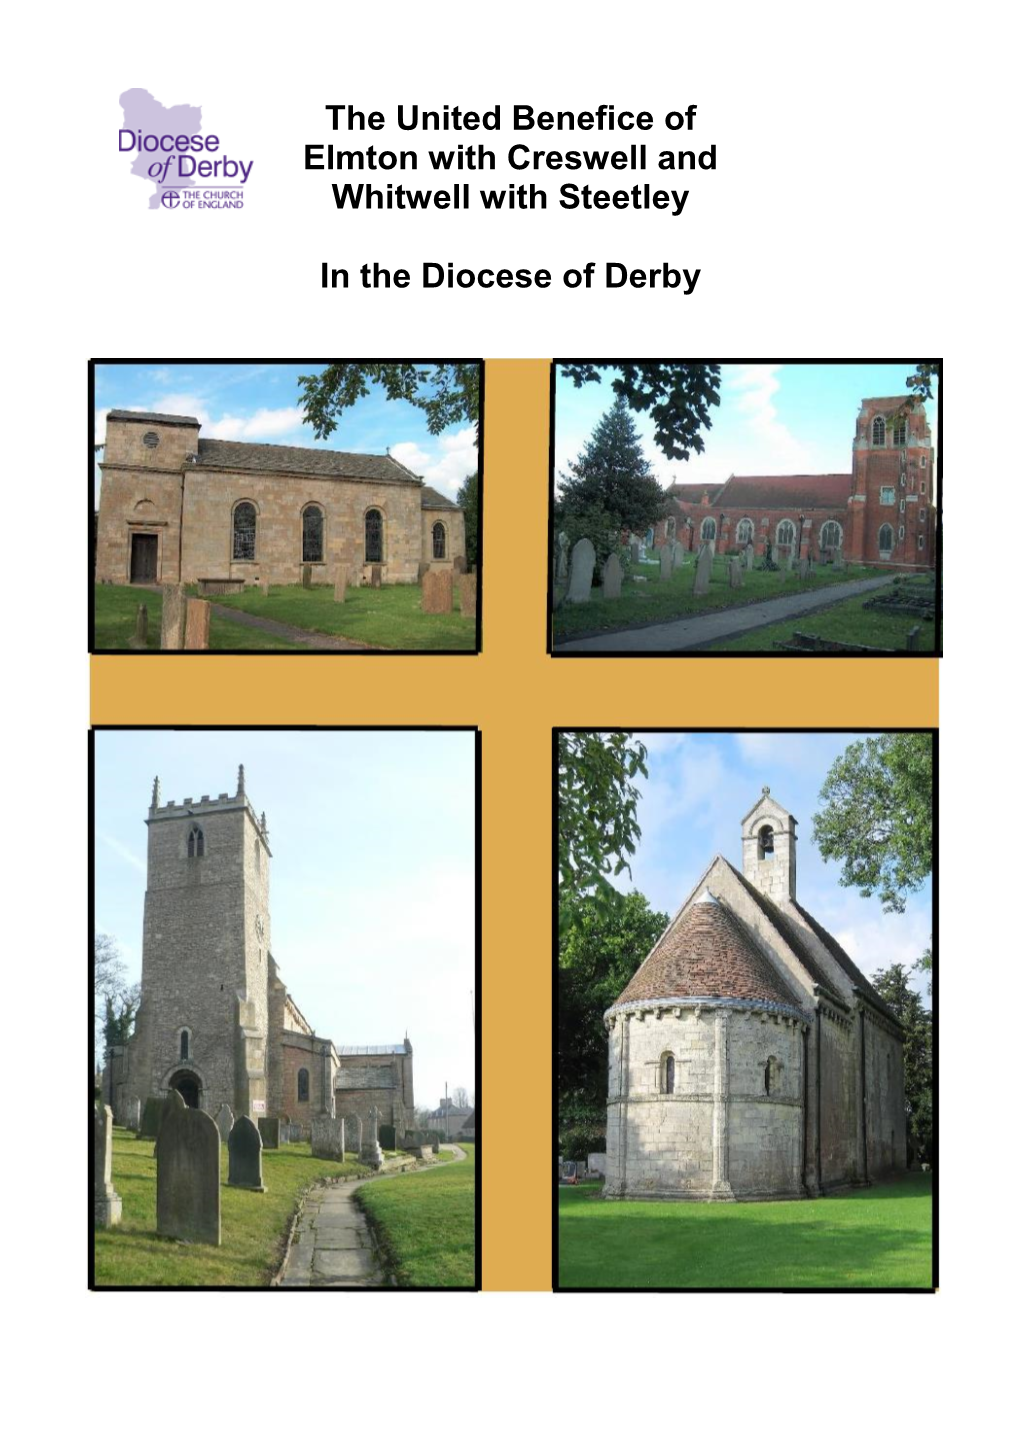 The United Benefice of Elmton with Creswell and Whitwell with Steetley